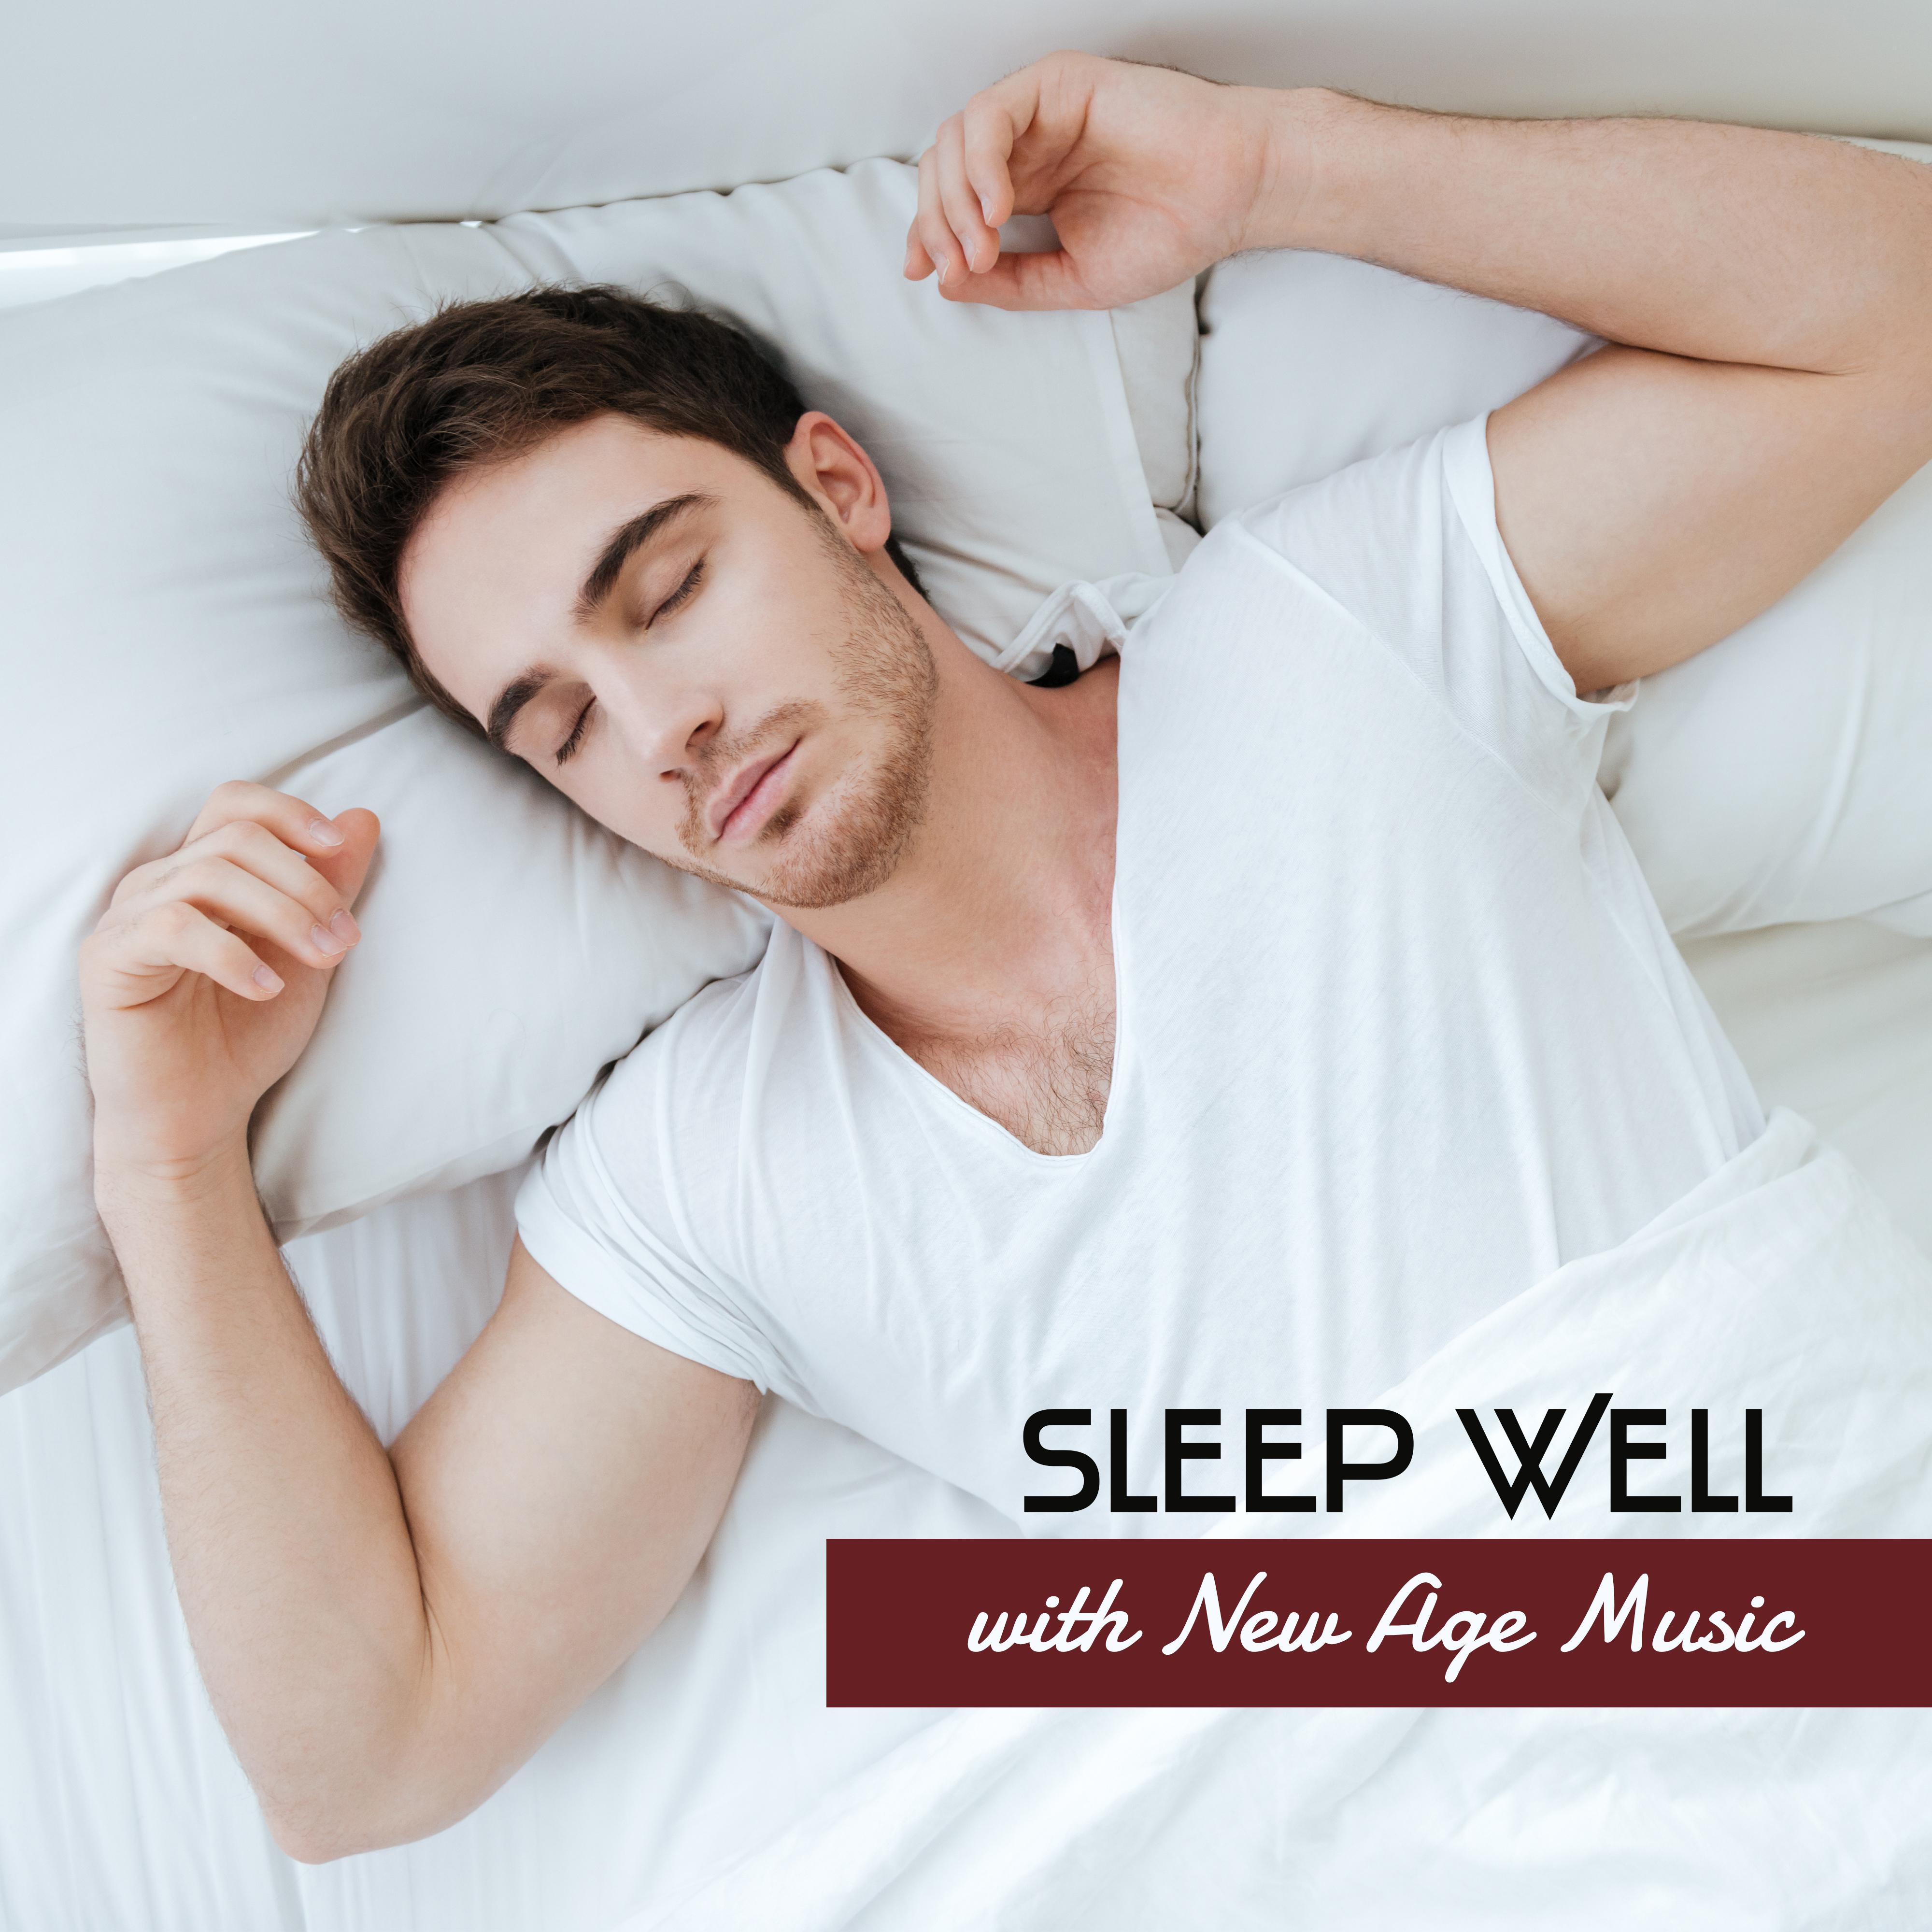 Sleep Well with New Age Music  Calming Music to Sleep, Dreaming Waves, New Age Soothing Melodies